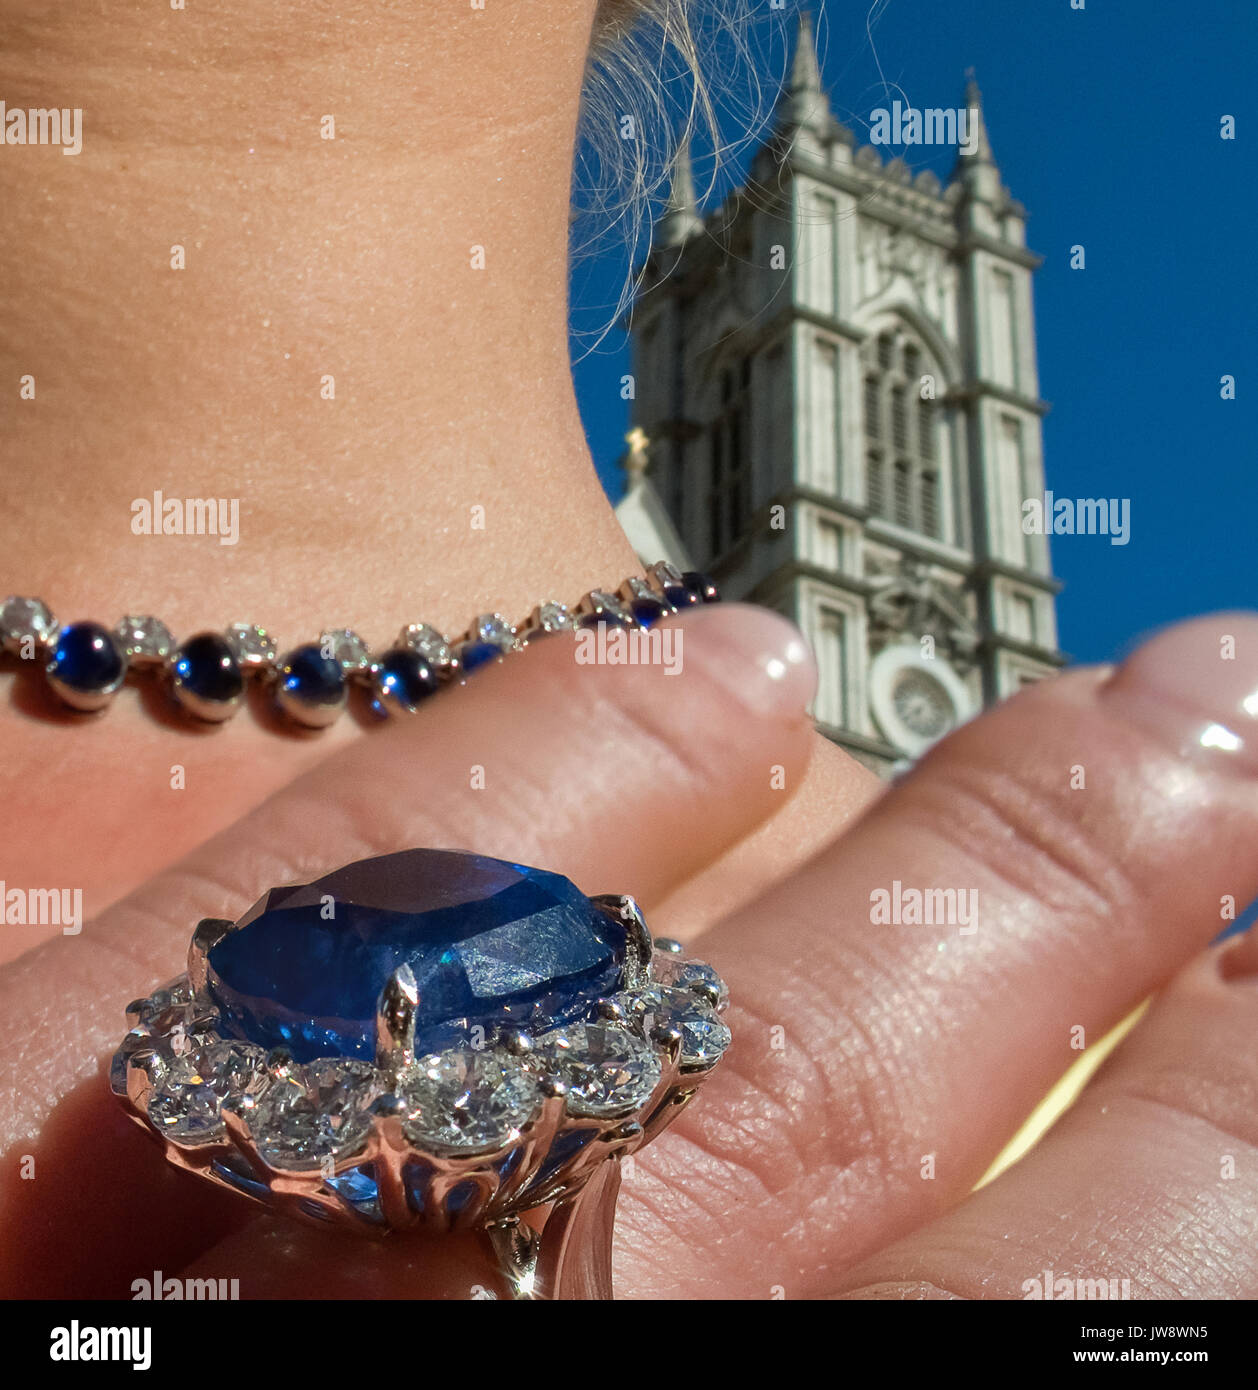 A model shows off her imitation Kate Middleton engagement ring outside Westminster Abbey two days before the Royal wedding. London, UK. Stock Photo